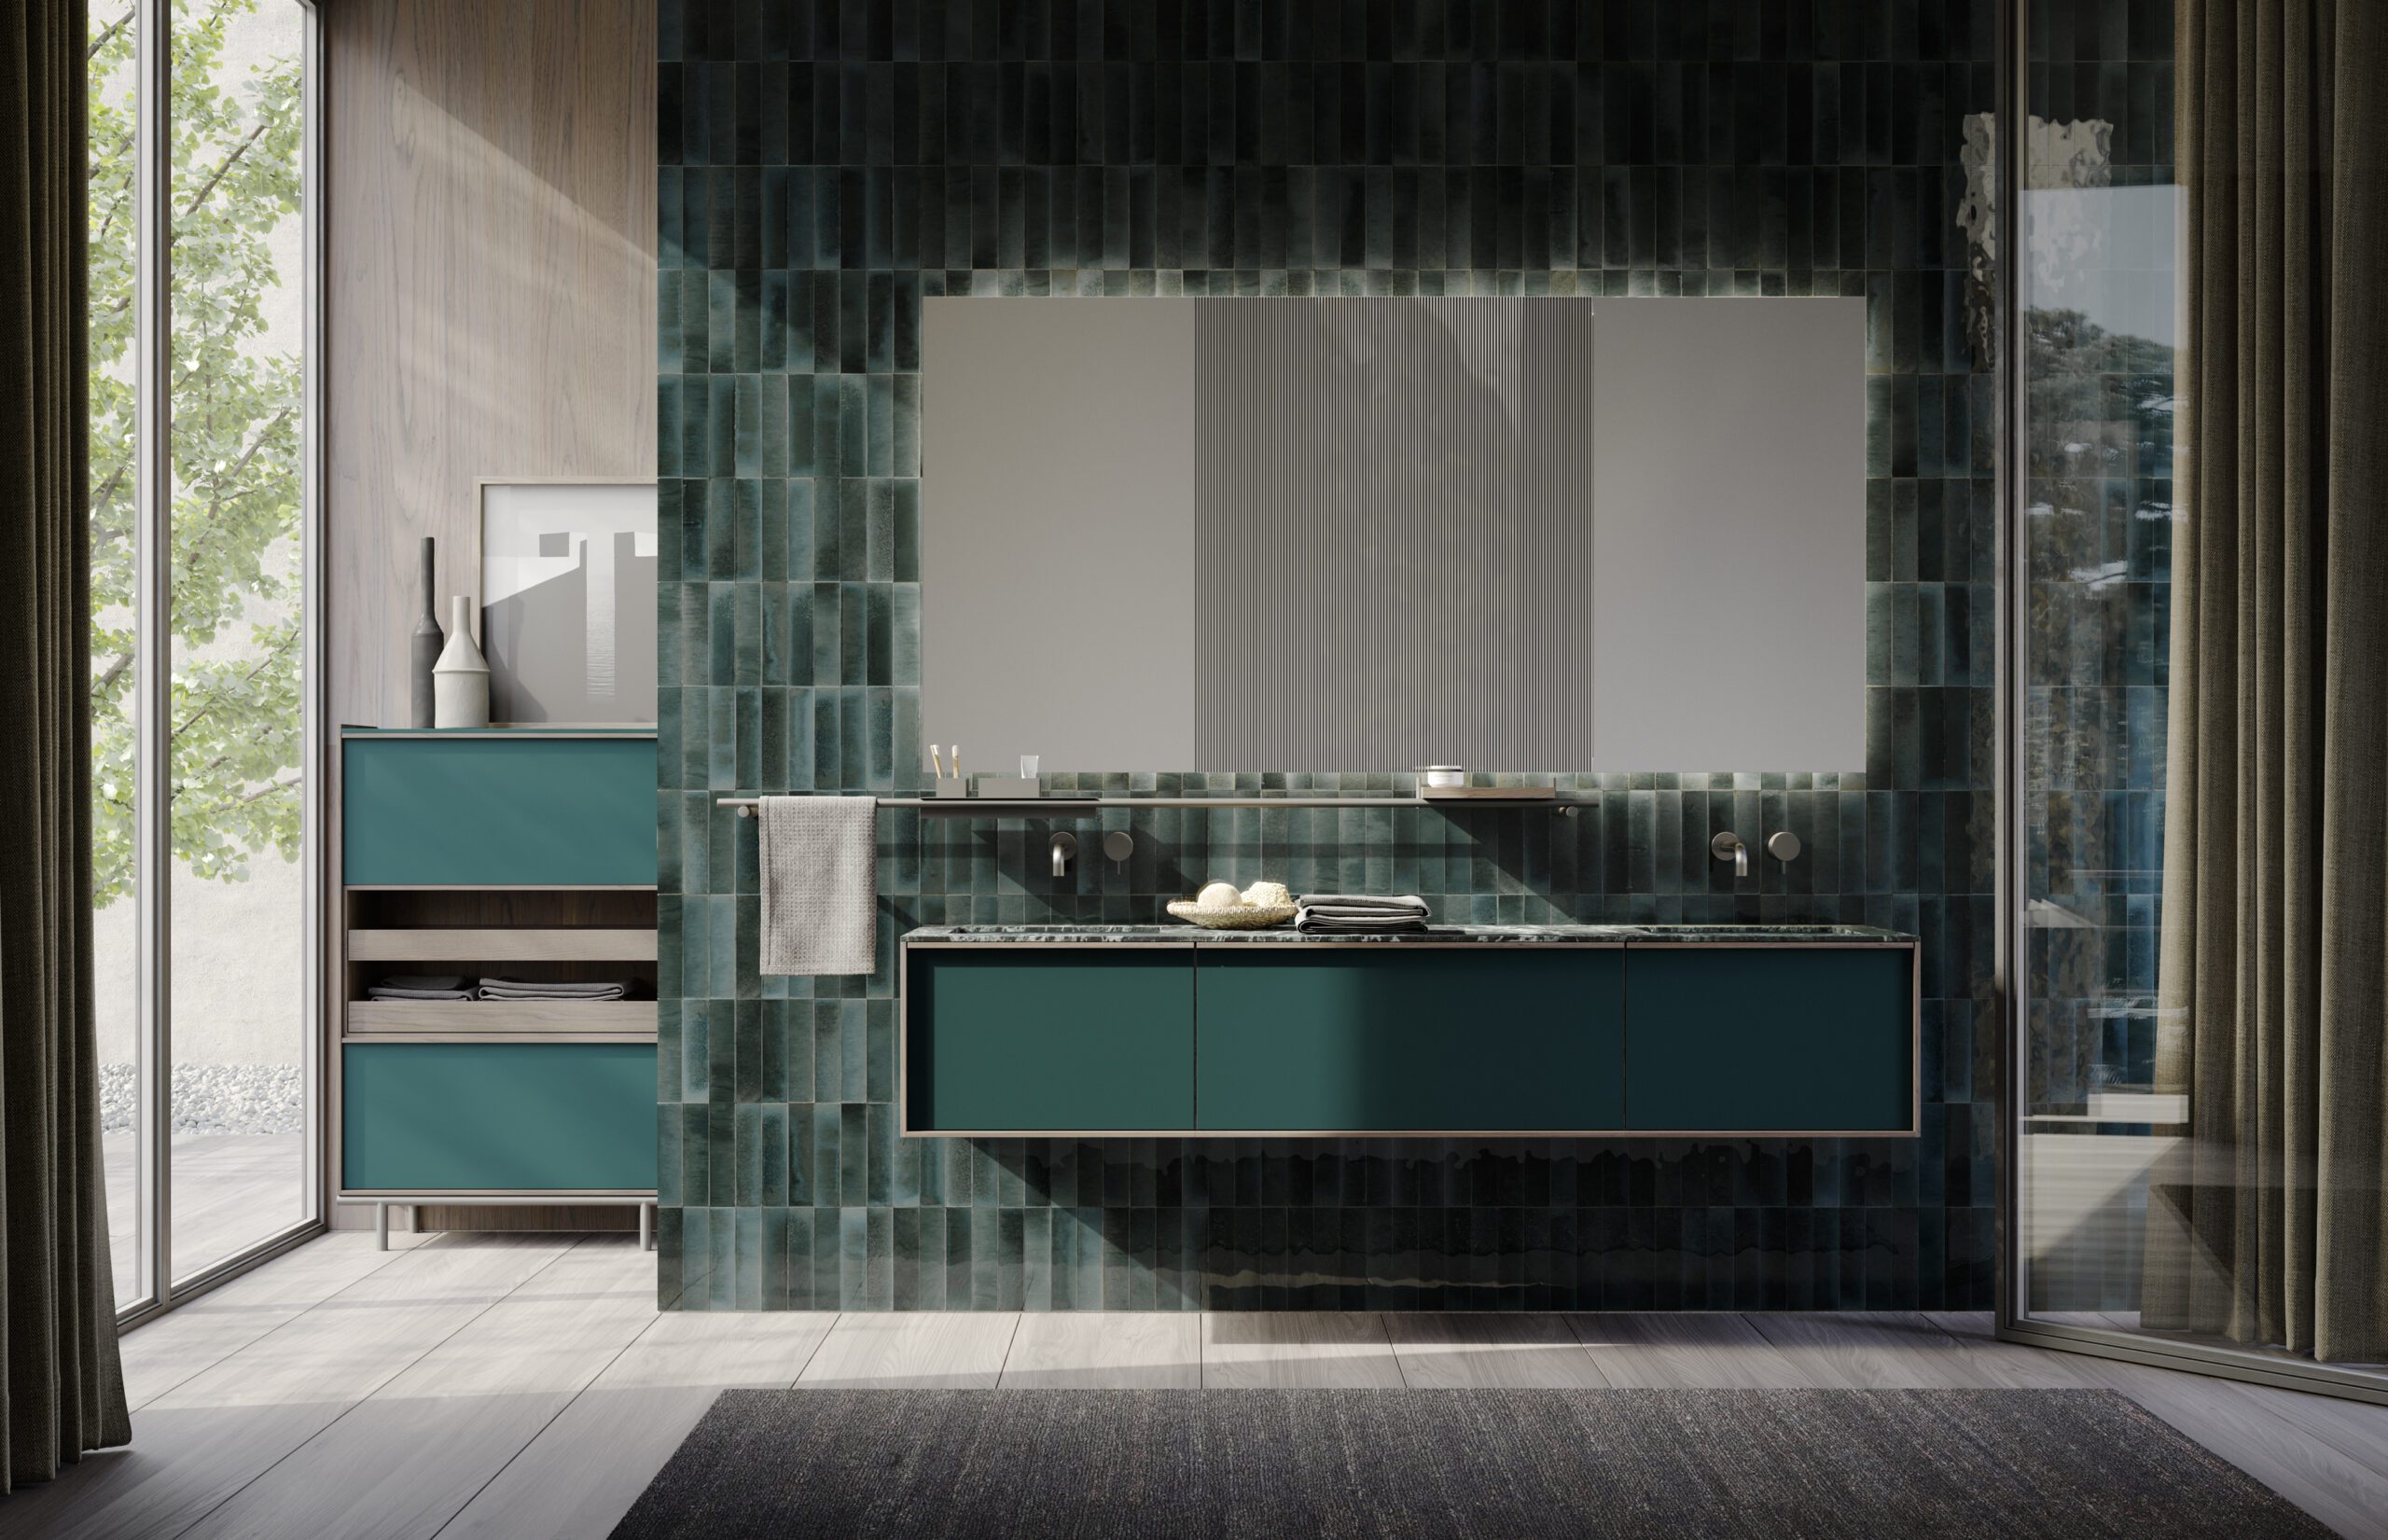 Luxury bathroom using Sartus cabinets in Verde Petrolio matte lacquer with drawers and frame in Rovere Creta wood. The metal bar that forms the base of the storage units (left) reappears as an accessorized bar underneath the mirror.